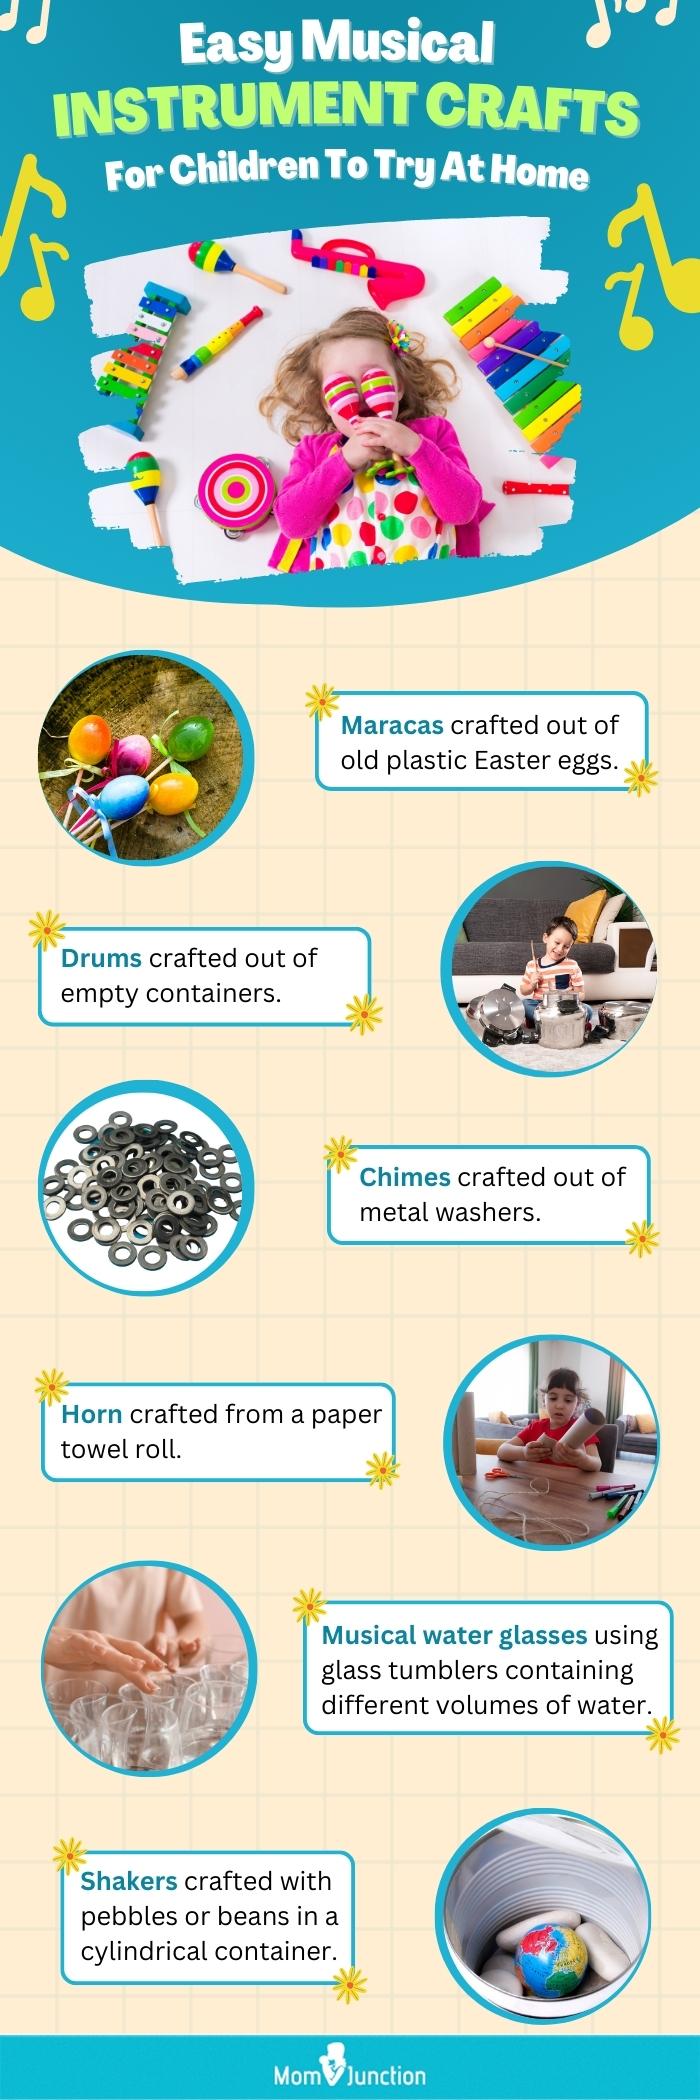 easy musical instrument crafts for children to try at home (infographic)